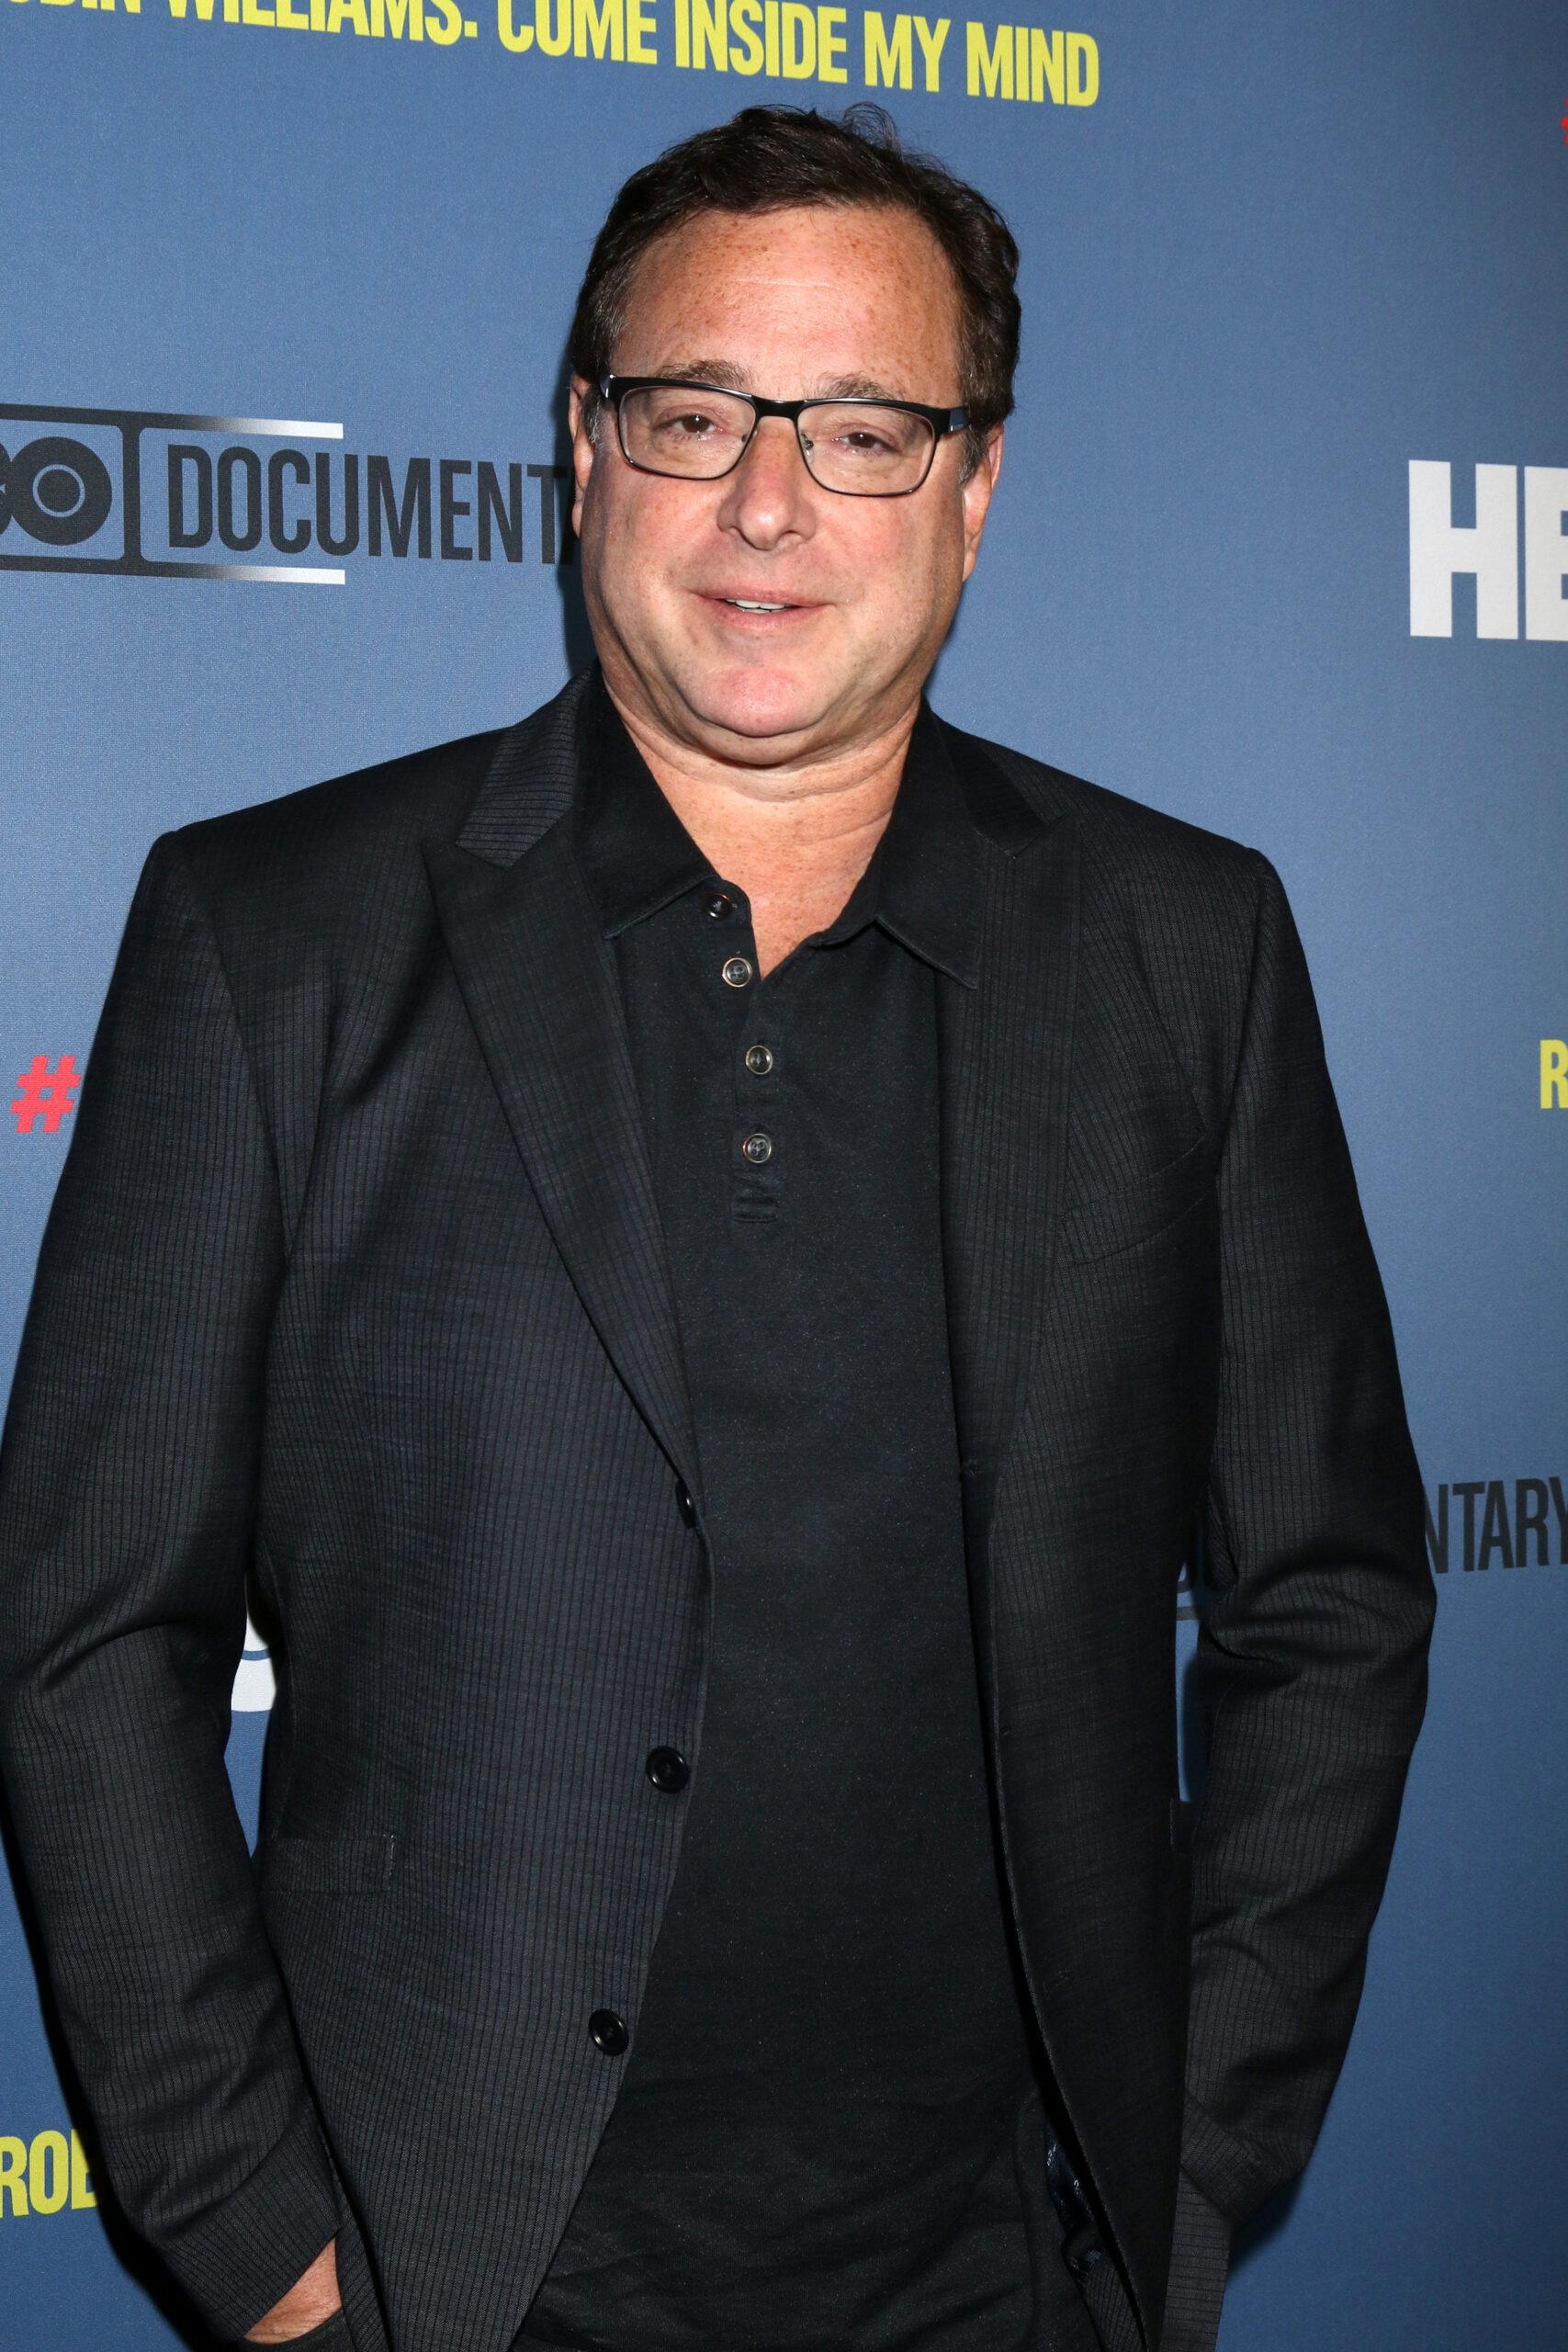 Bob Saget at "Robin Williams: Come Inside My Mind" HBO Premiere Screening - Los Angeles